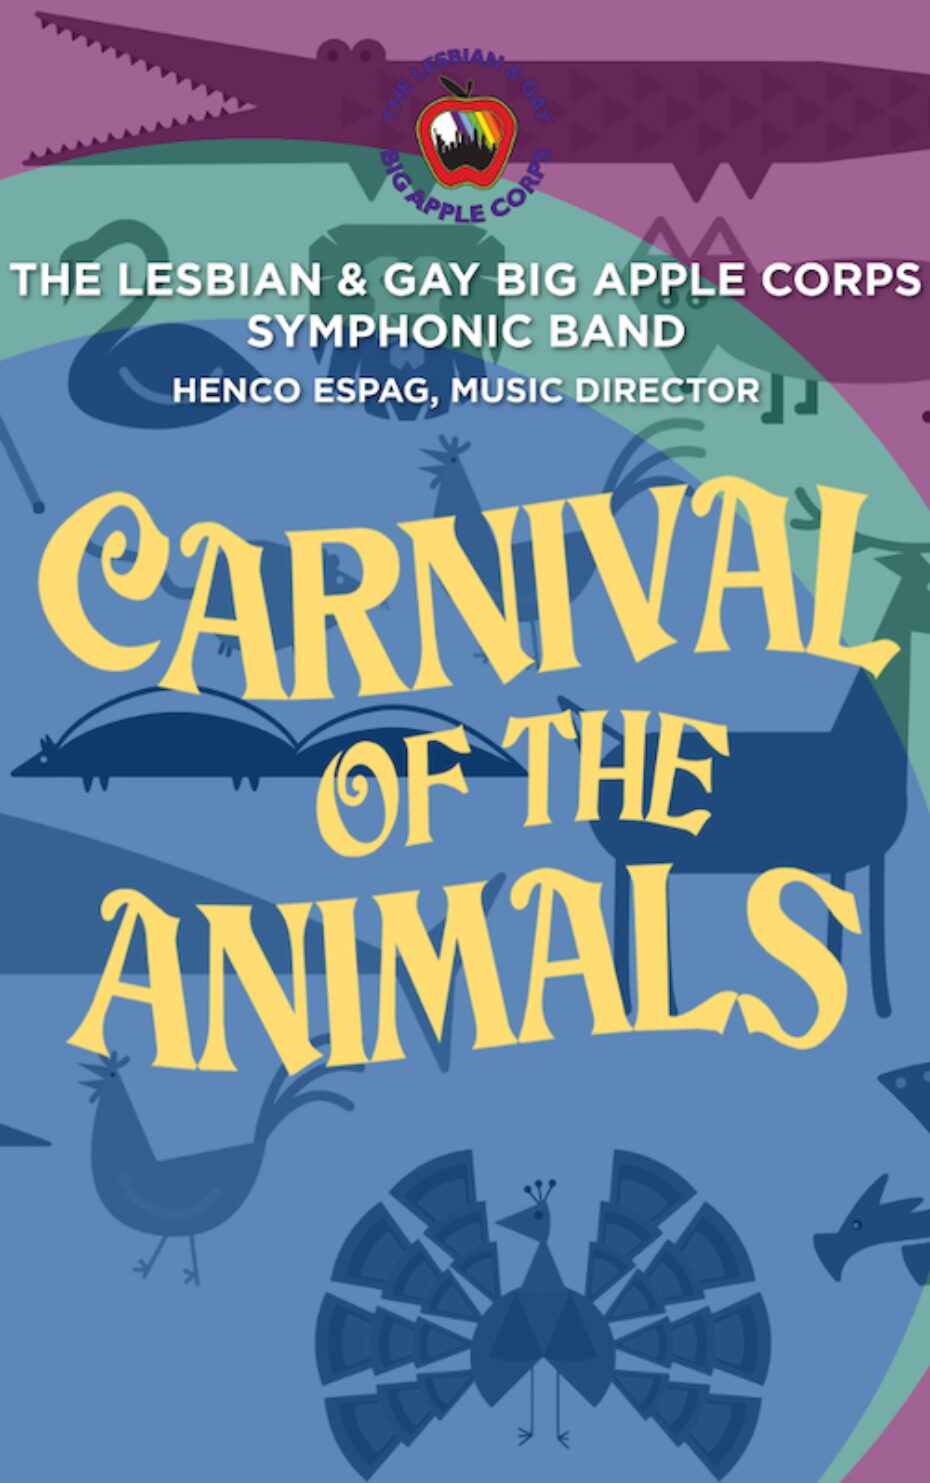 Lesbian & Big Apple Corps: Carnival of the Animals | Symphony Space